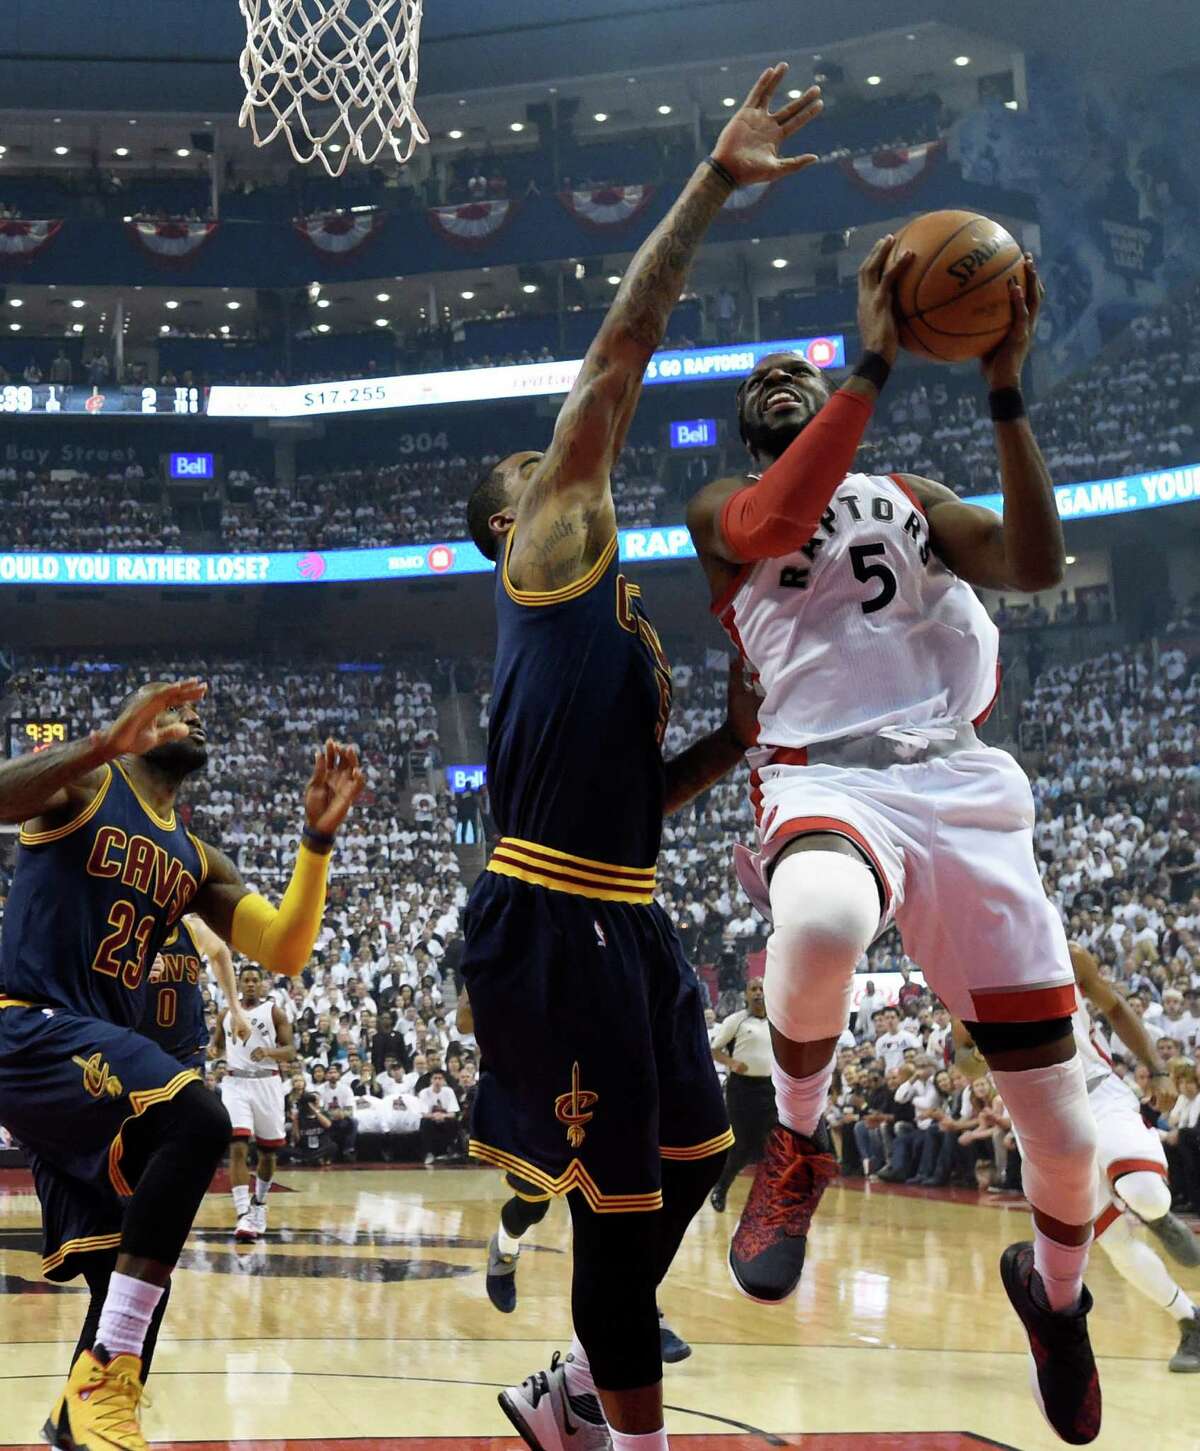 Toronto Raptors forward DeMarre Carroll (5) goes up for a shot as Cleveland Cavaliers guard-forward J.R. Smith defends during first half Eastern Conference final playoff basketball action in Toronto on Monday, May 23, 2016. Carroll made the score. (Frank Gunn/The Canadian Press via AP) MANDATORY CREDIT